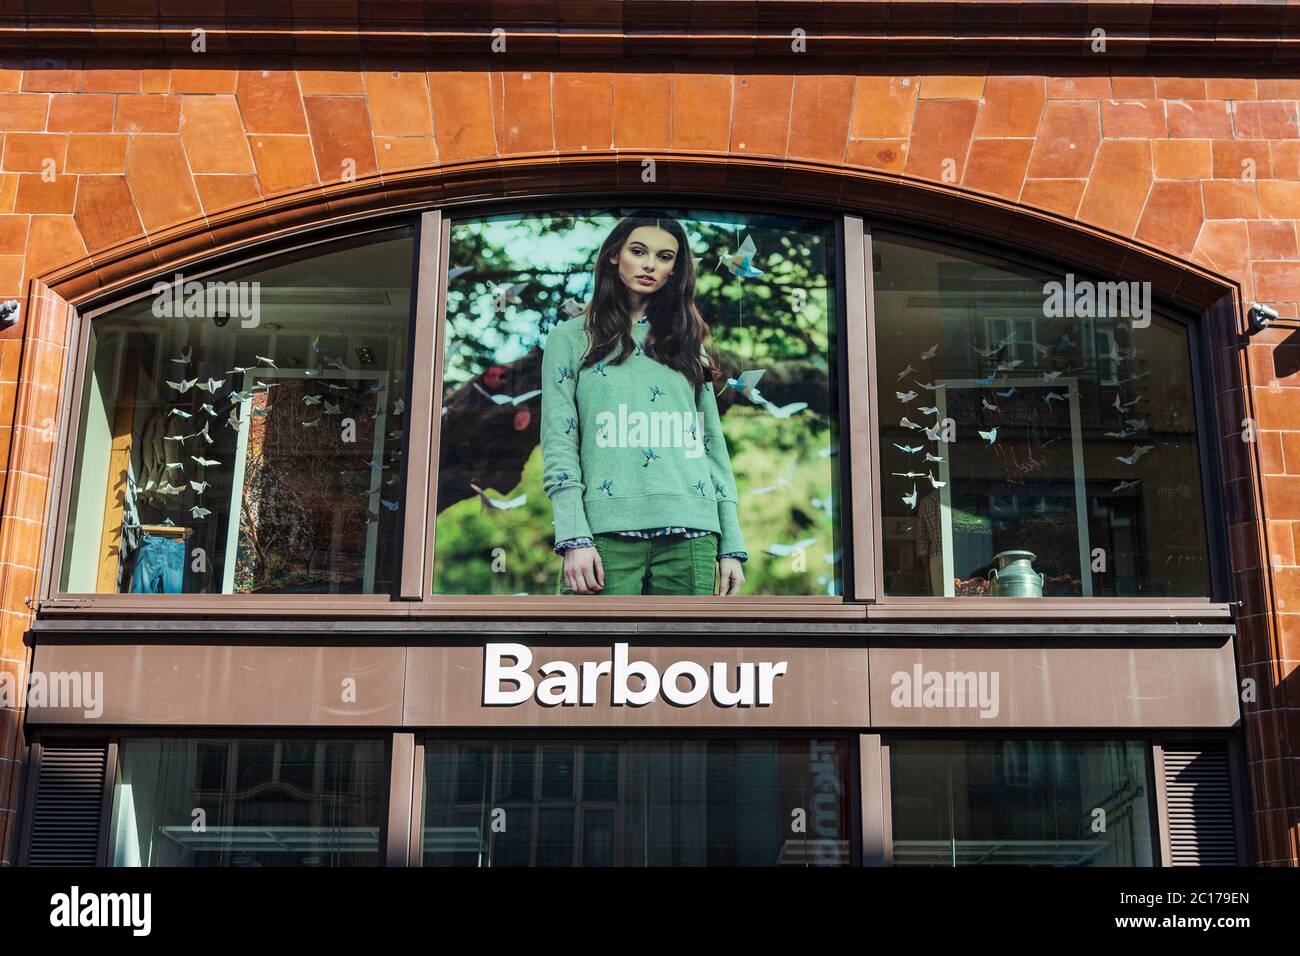 London, UK. 27th May, 2020. Barbour shop in Covent Garden. Credit: Dave  Rushen/SOPA Images/ZUMA Wire/Alamy Live News Stock Photo - Alamy